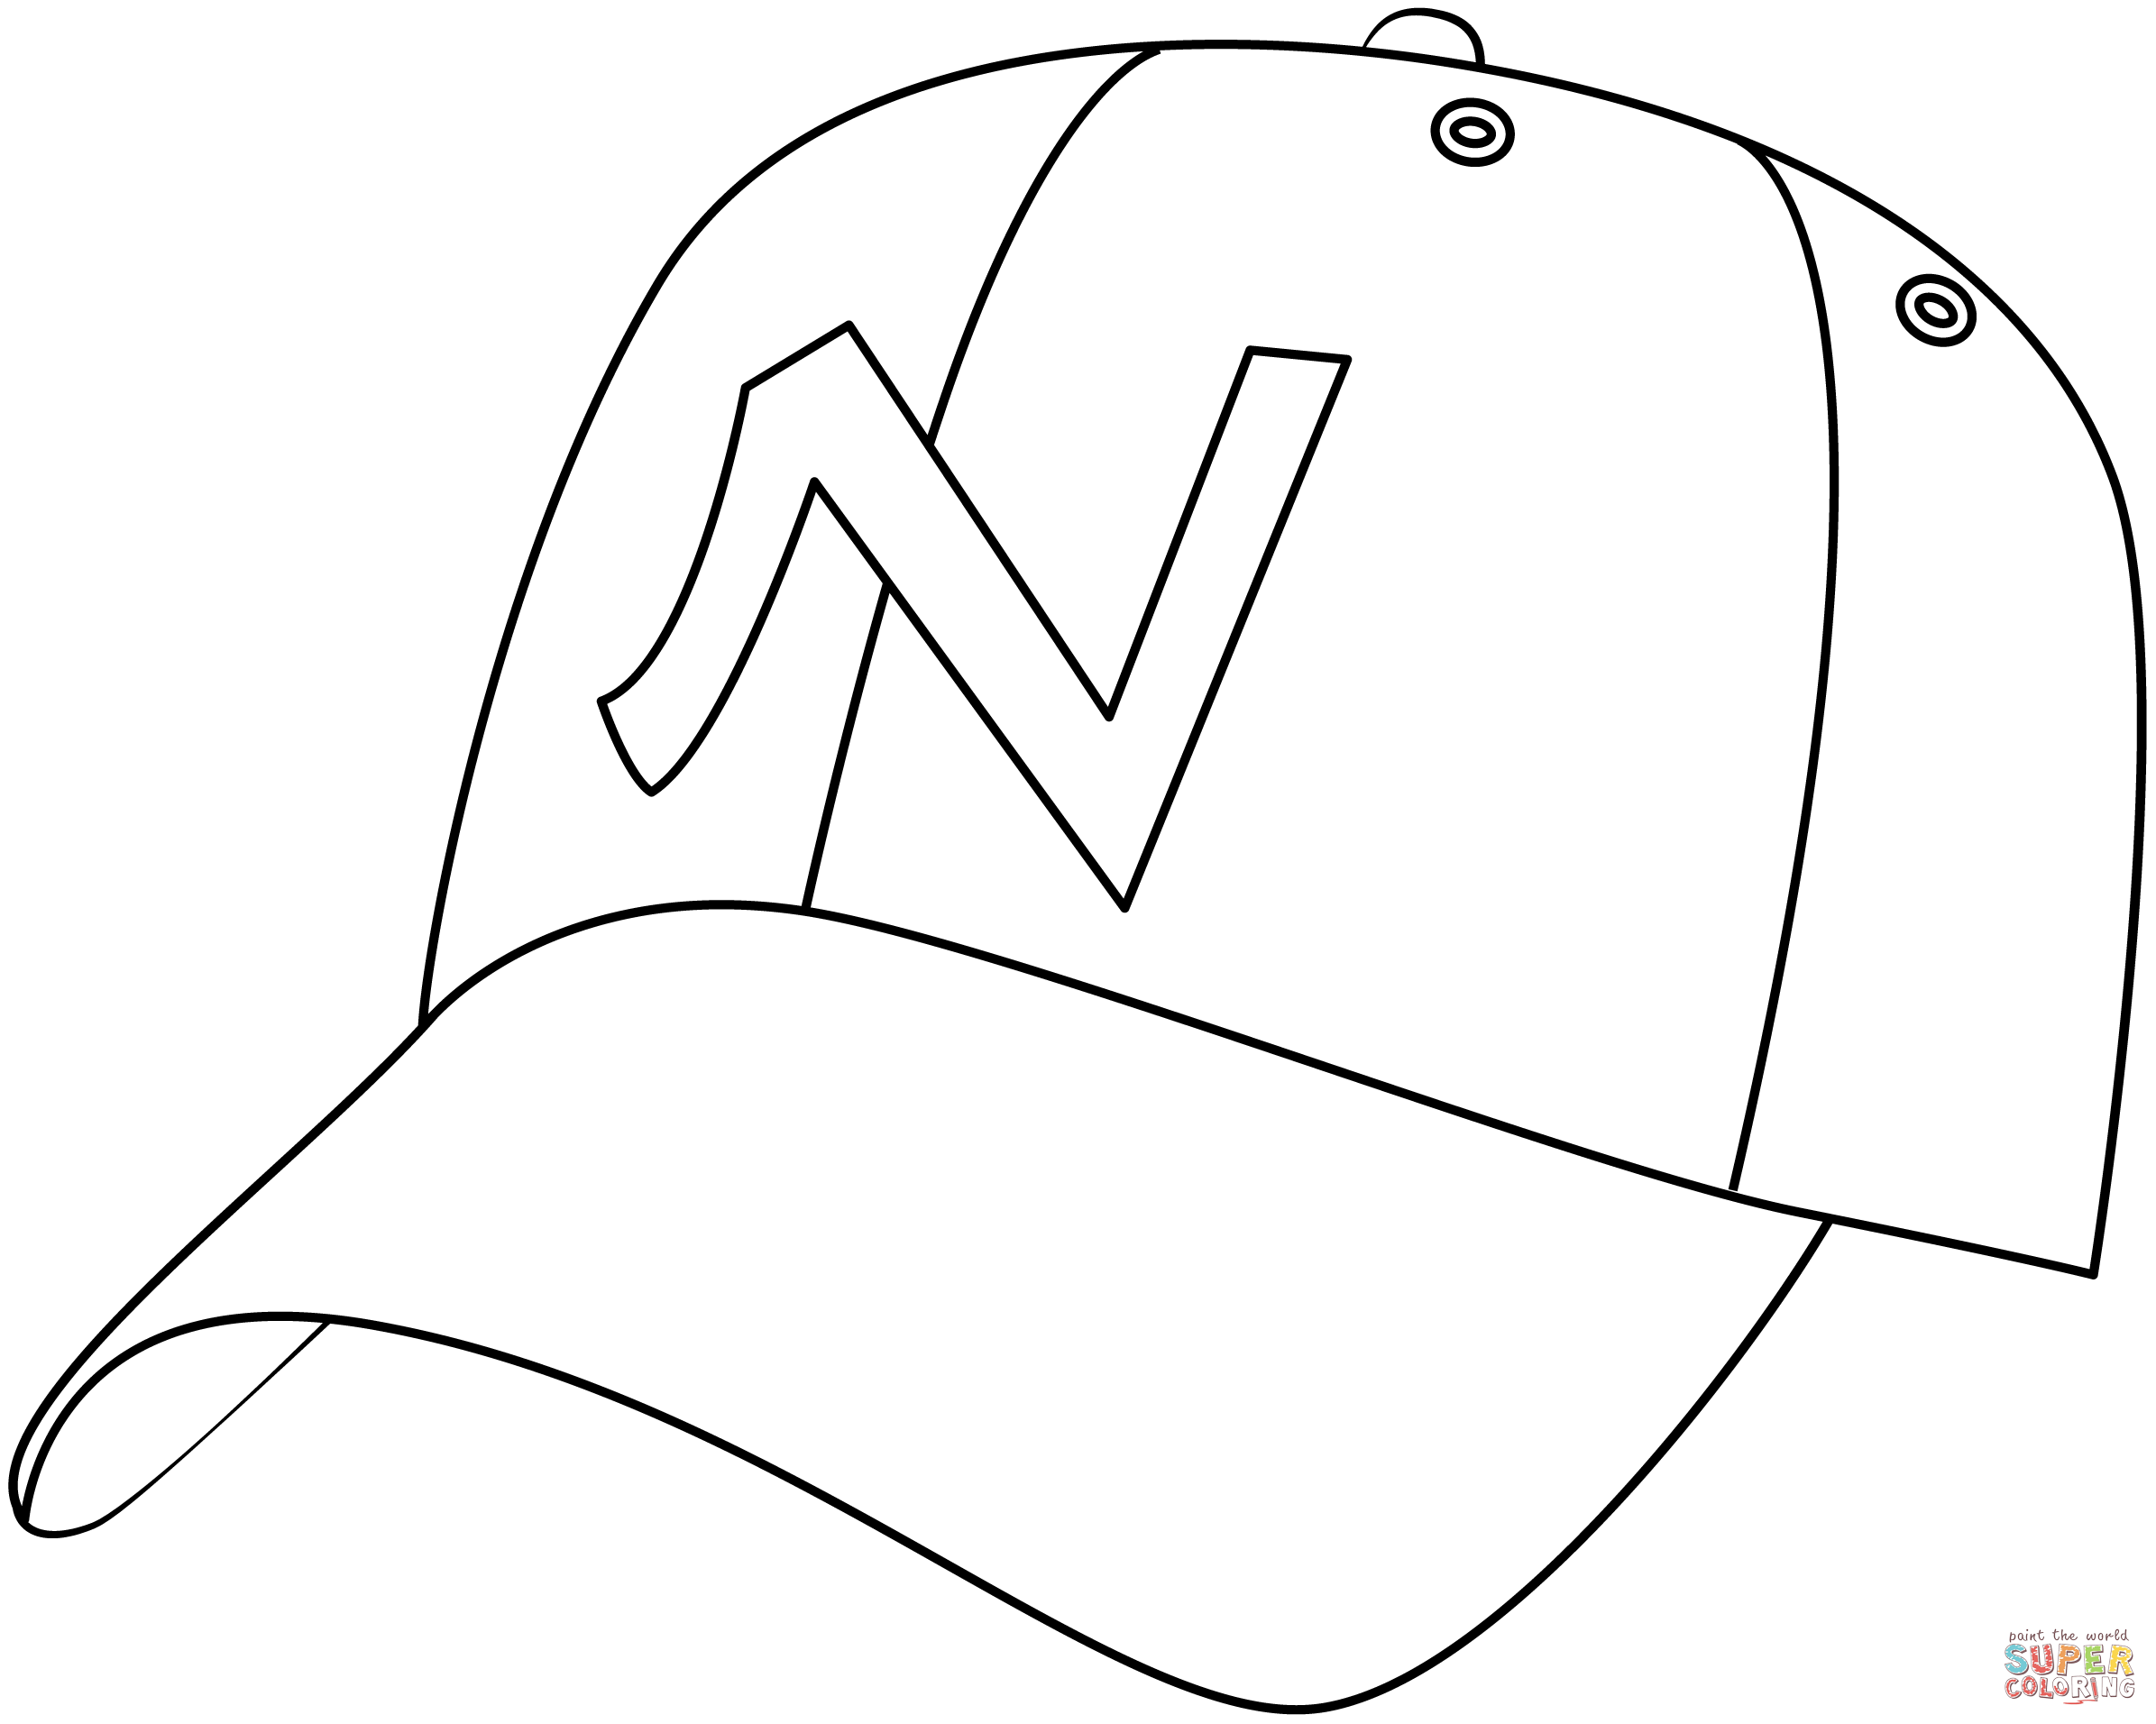 Baseball hat coloring page free printable coloring pages